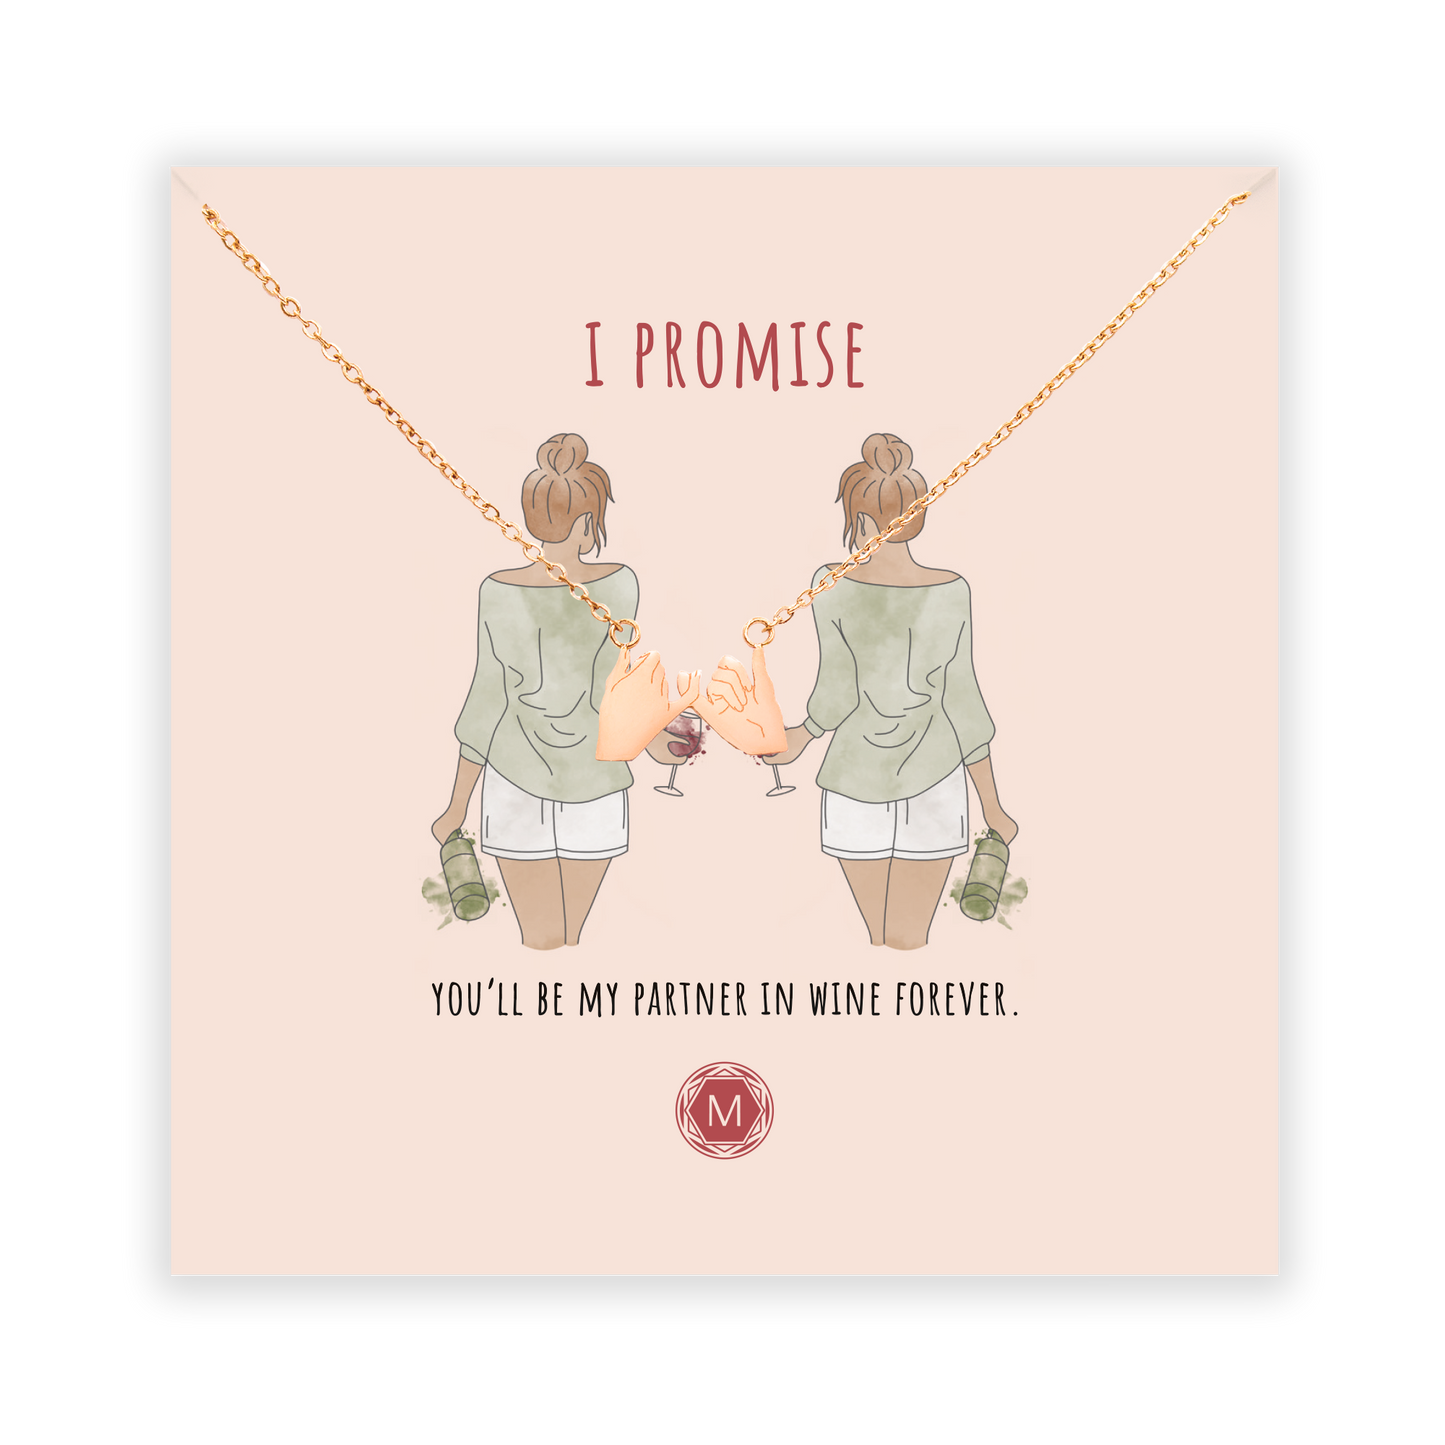 I PROMISE Necklace